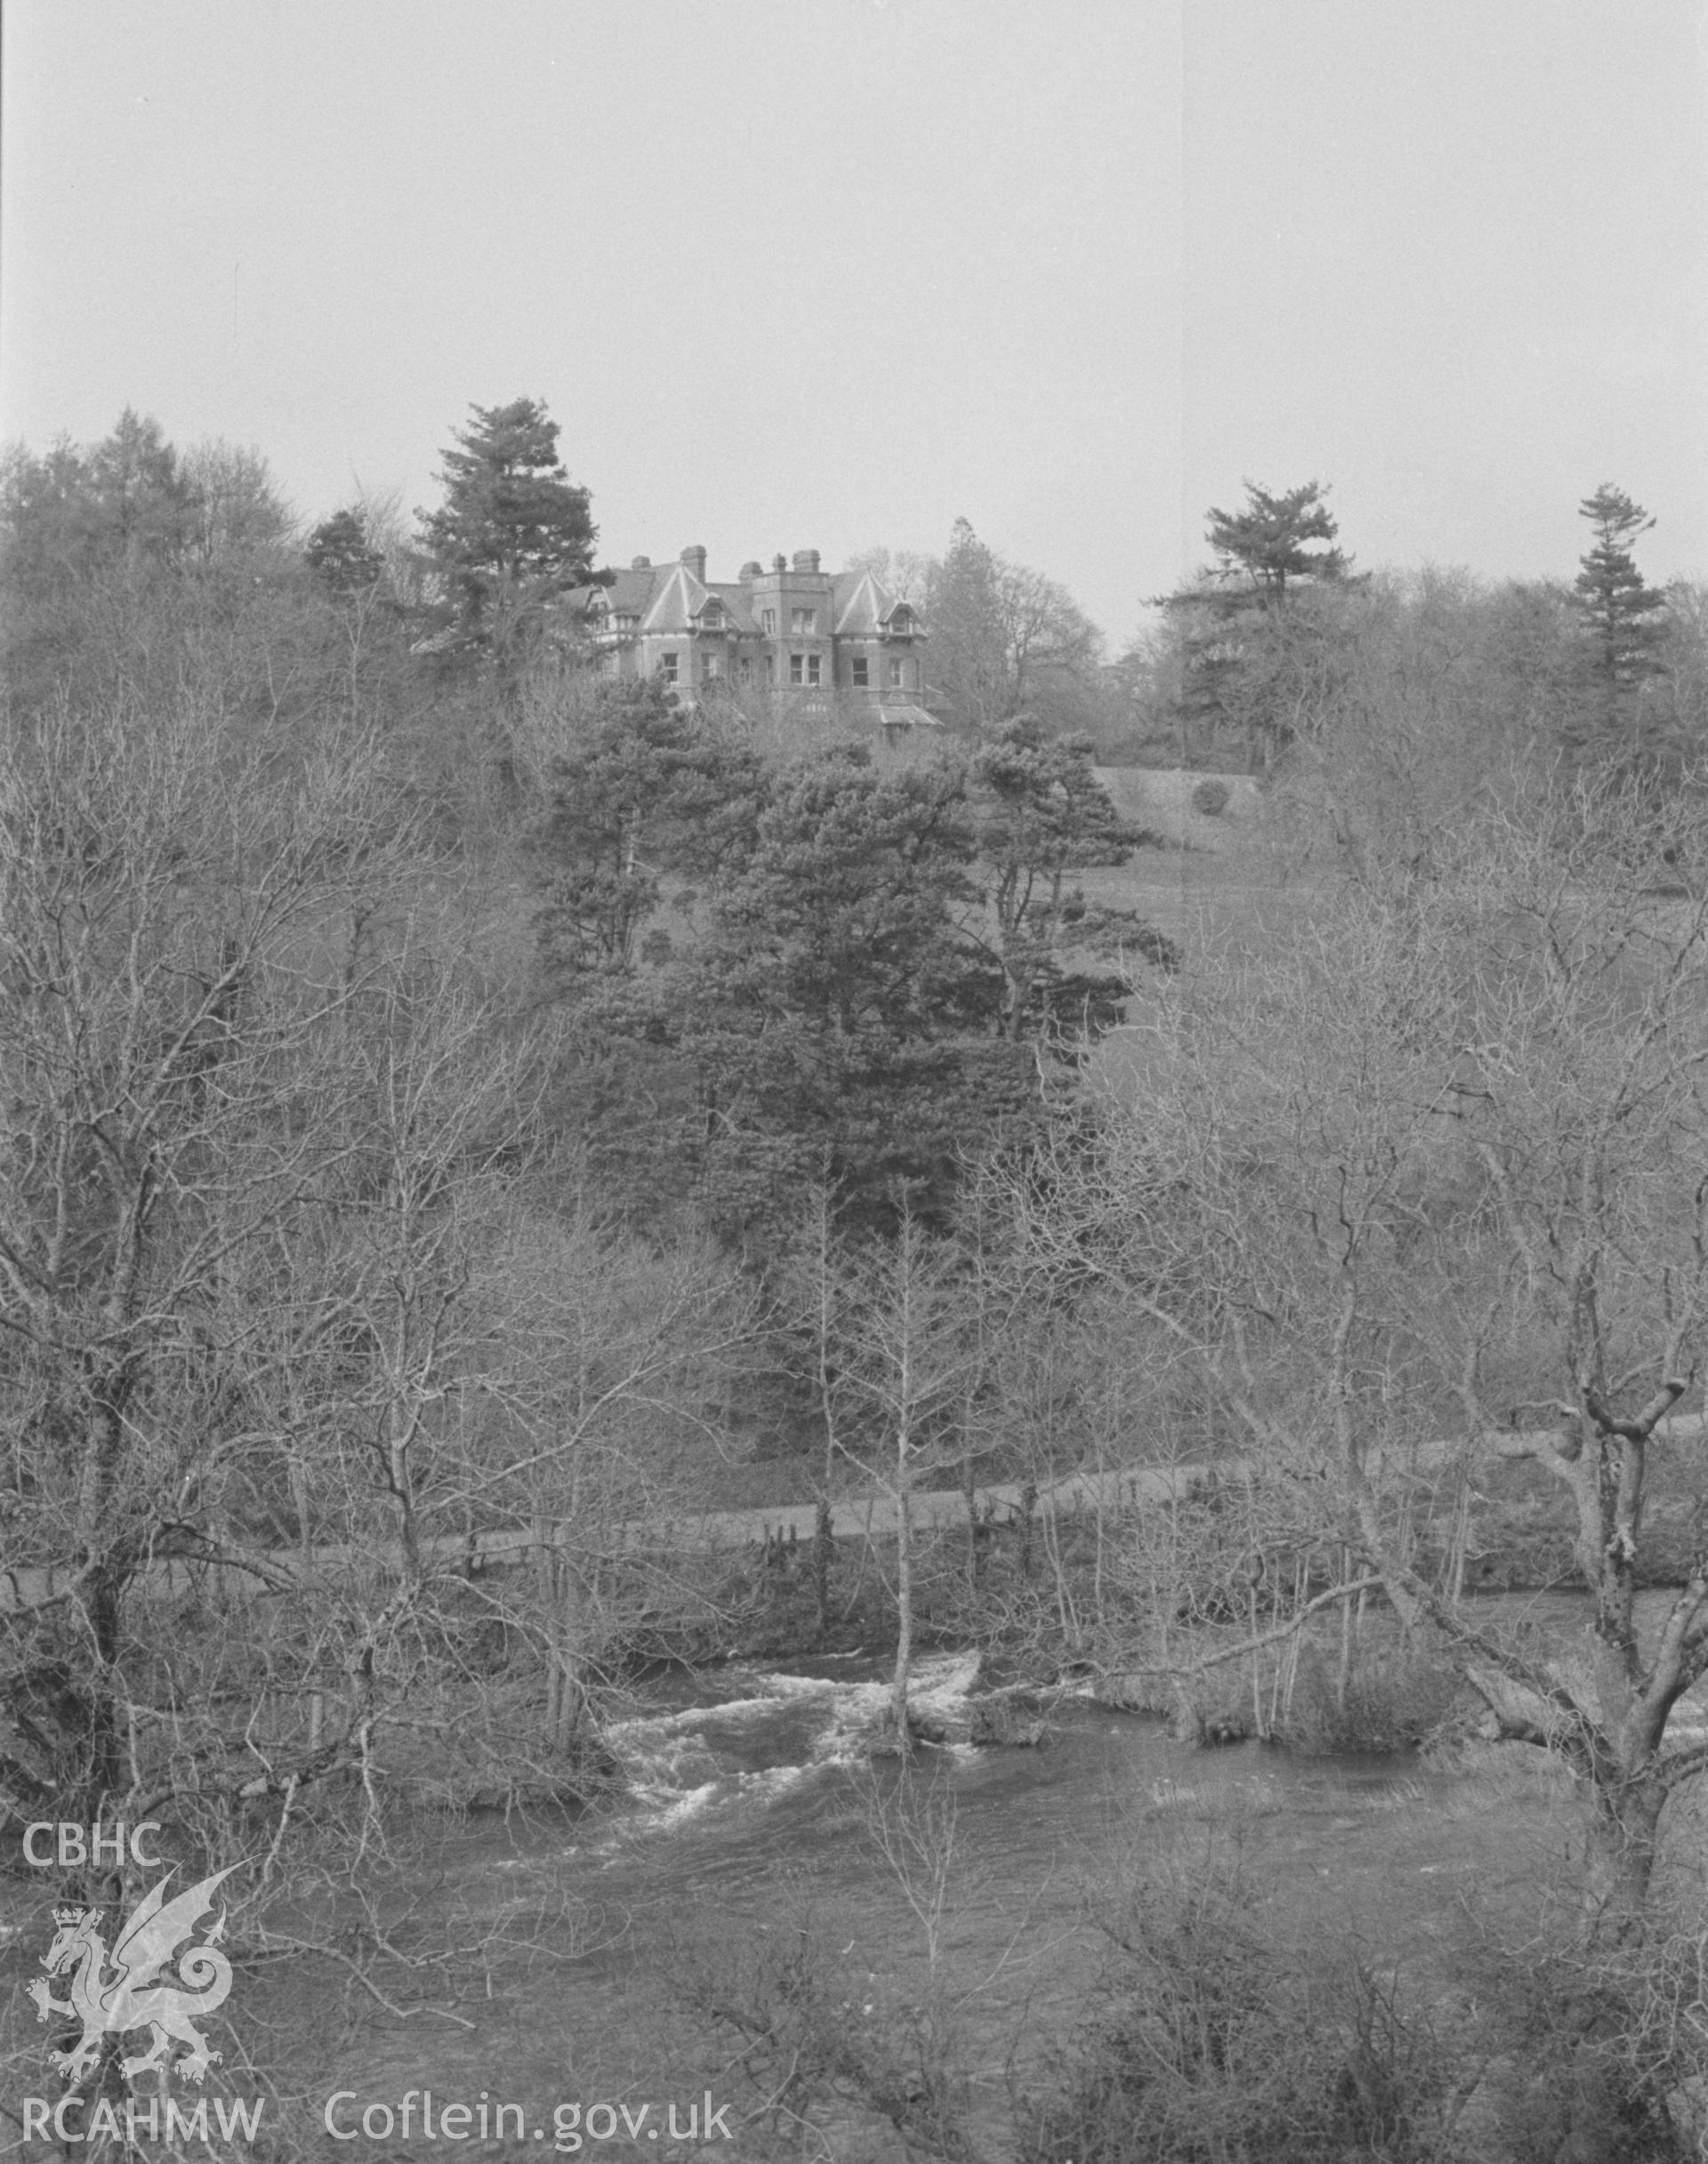 Digital copy of a black and white negative showing Cilgwyn, Newcastle Emlyn, looking across the Teifi from the castle earthworks. Photographed by Arthur O. Chater in April 1966 looking north east from Grid Reference SN 312 407.